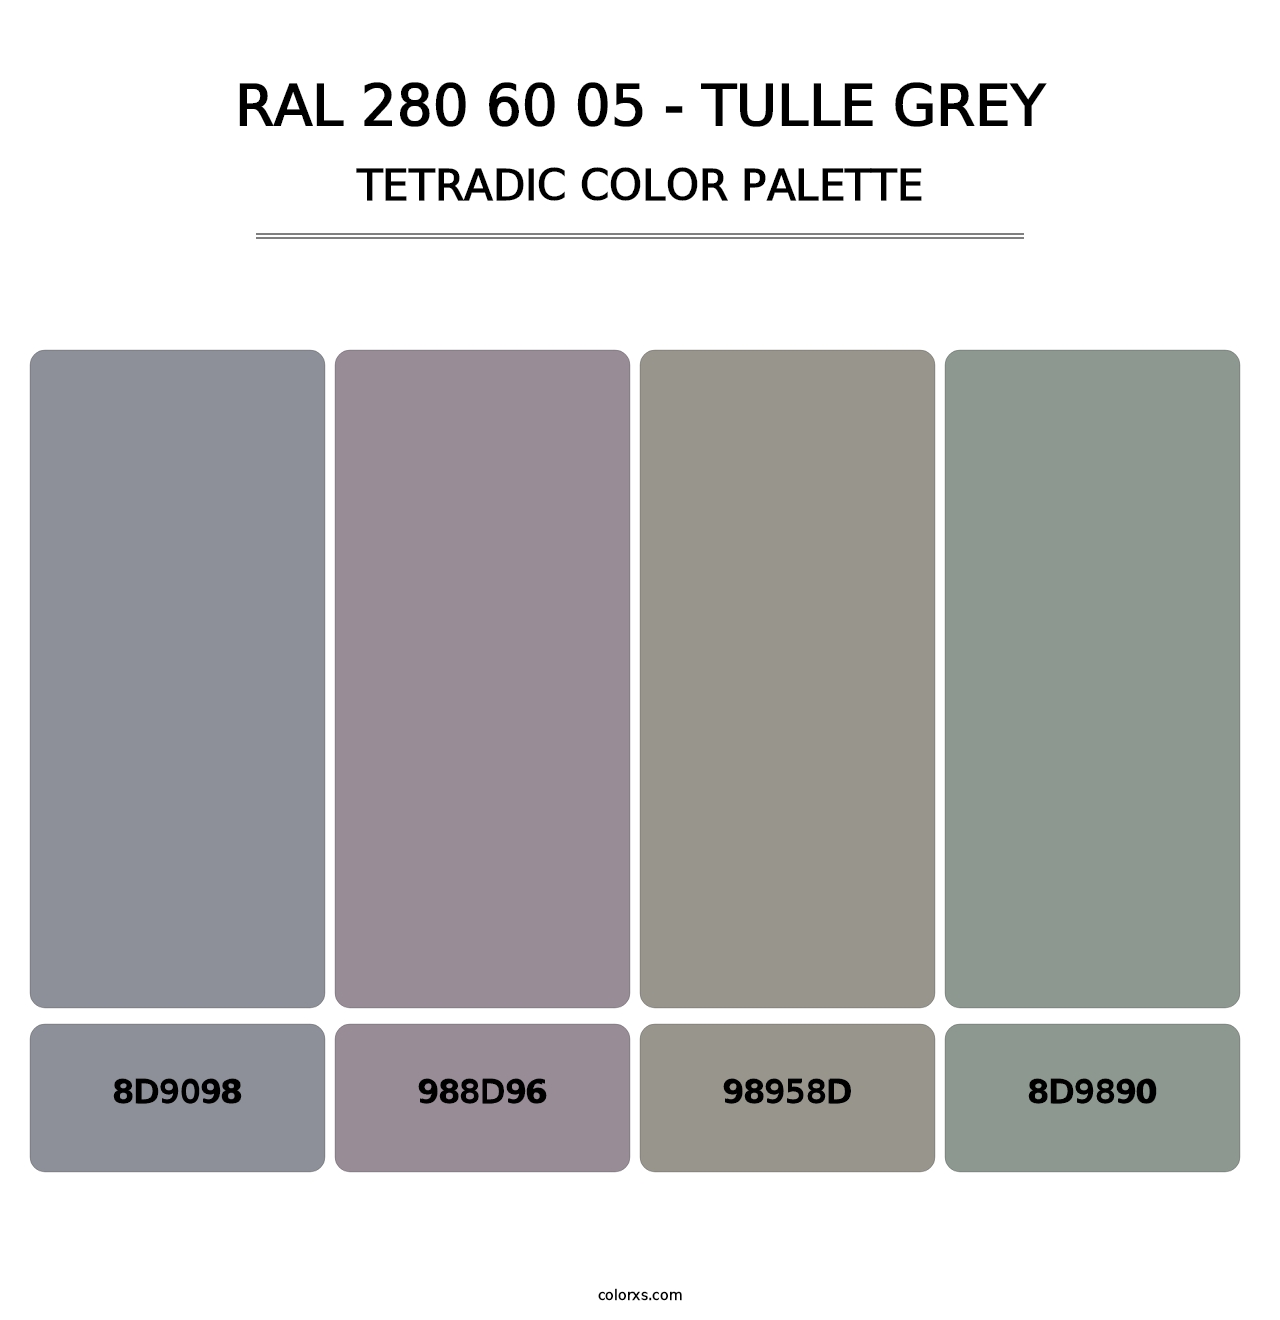 RAL 280 60 05 - Tulle Grey - Tetradic Color Palette